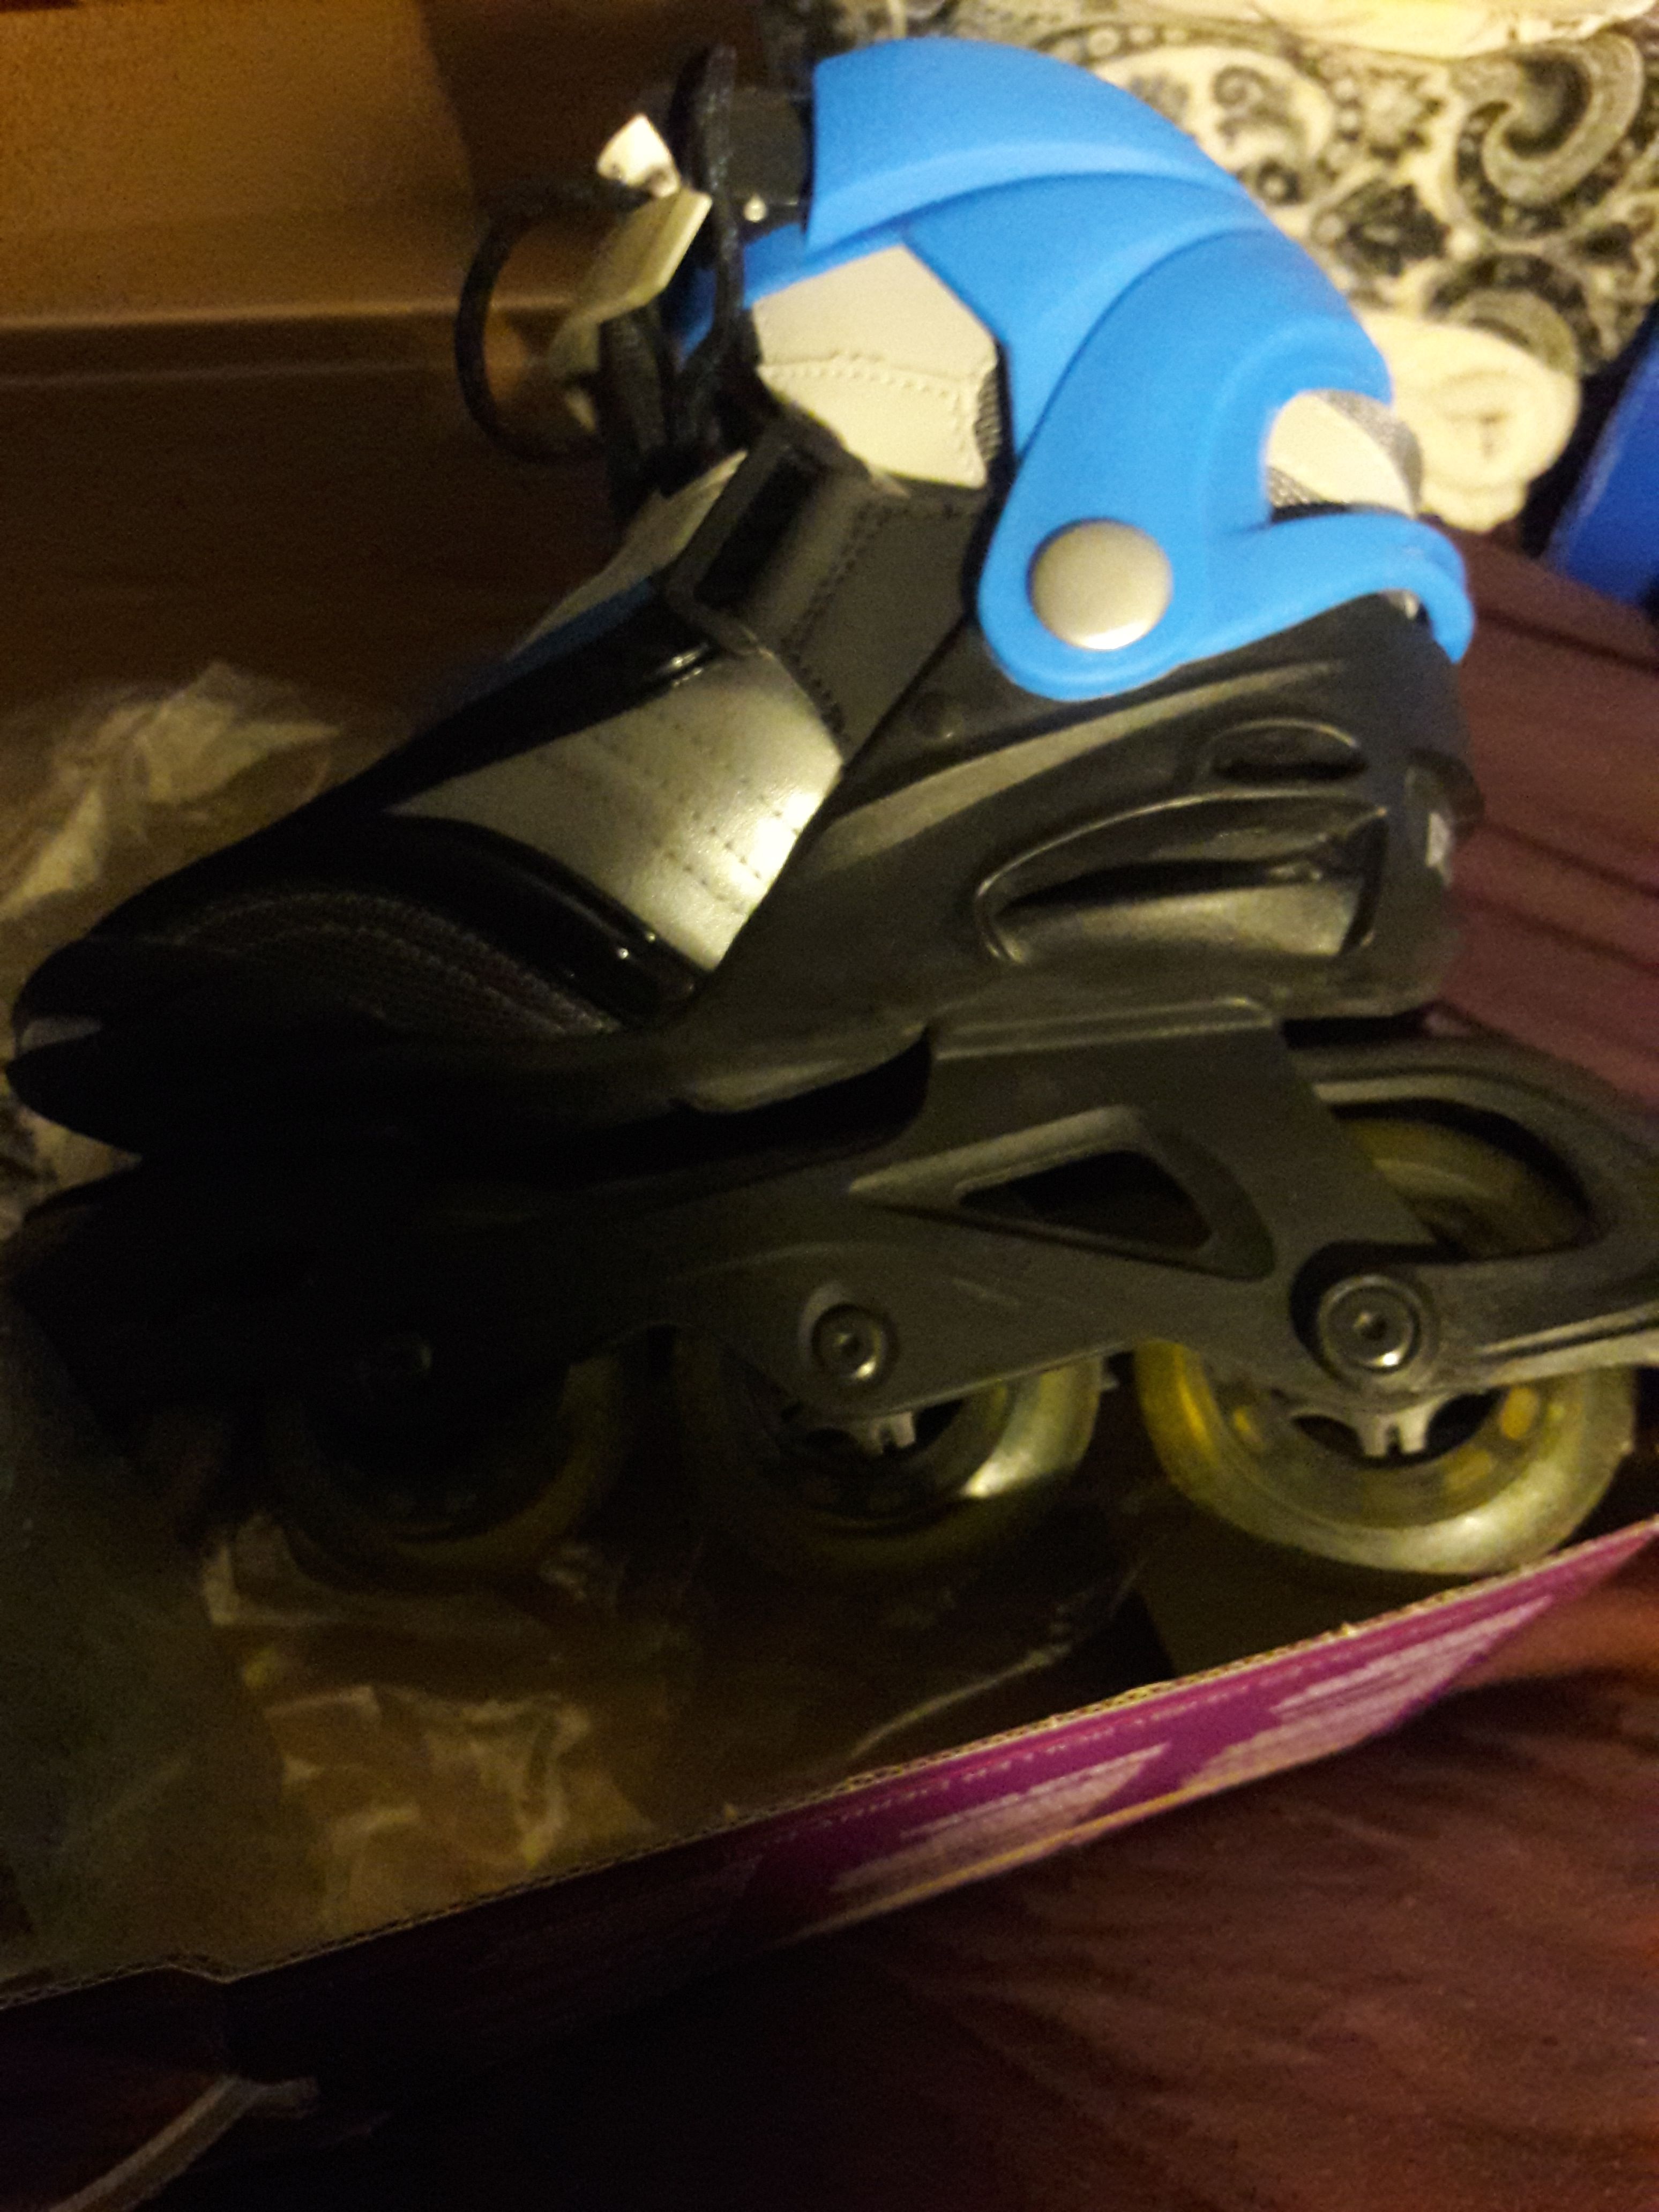 Womens Brand New Roller Blades size 8 with knee pads $10